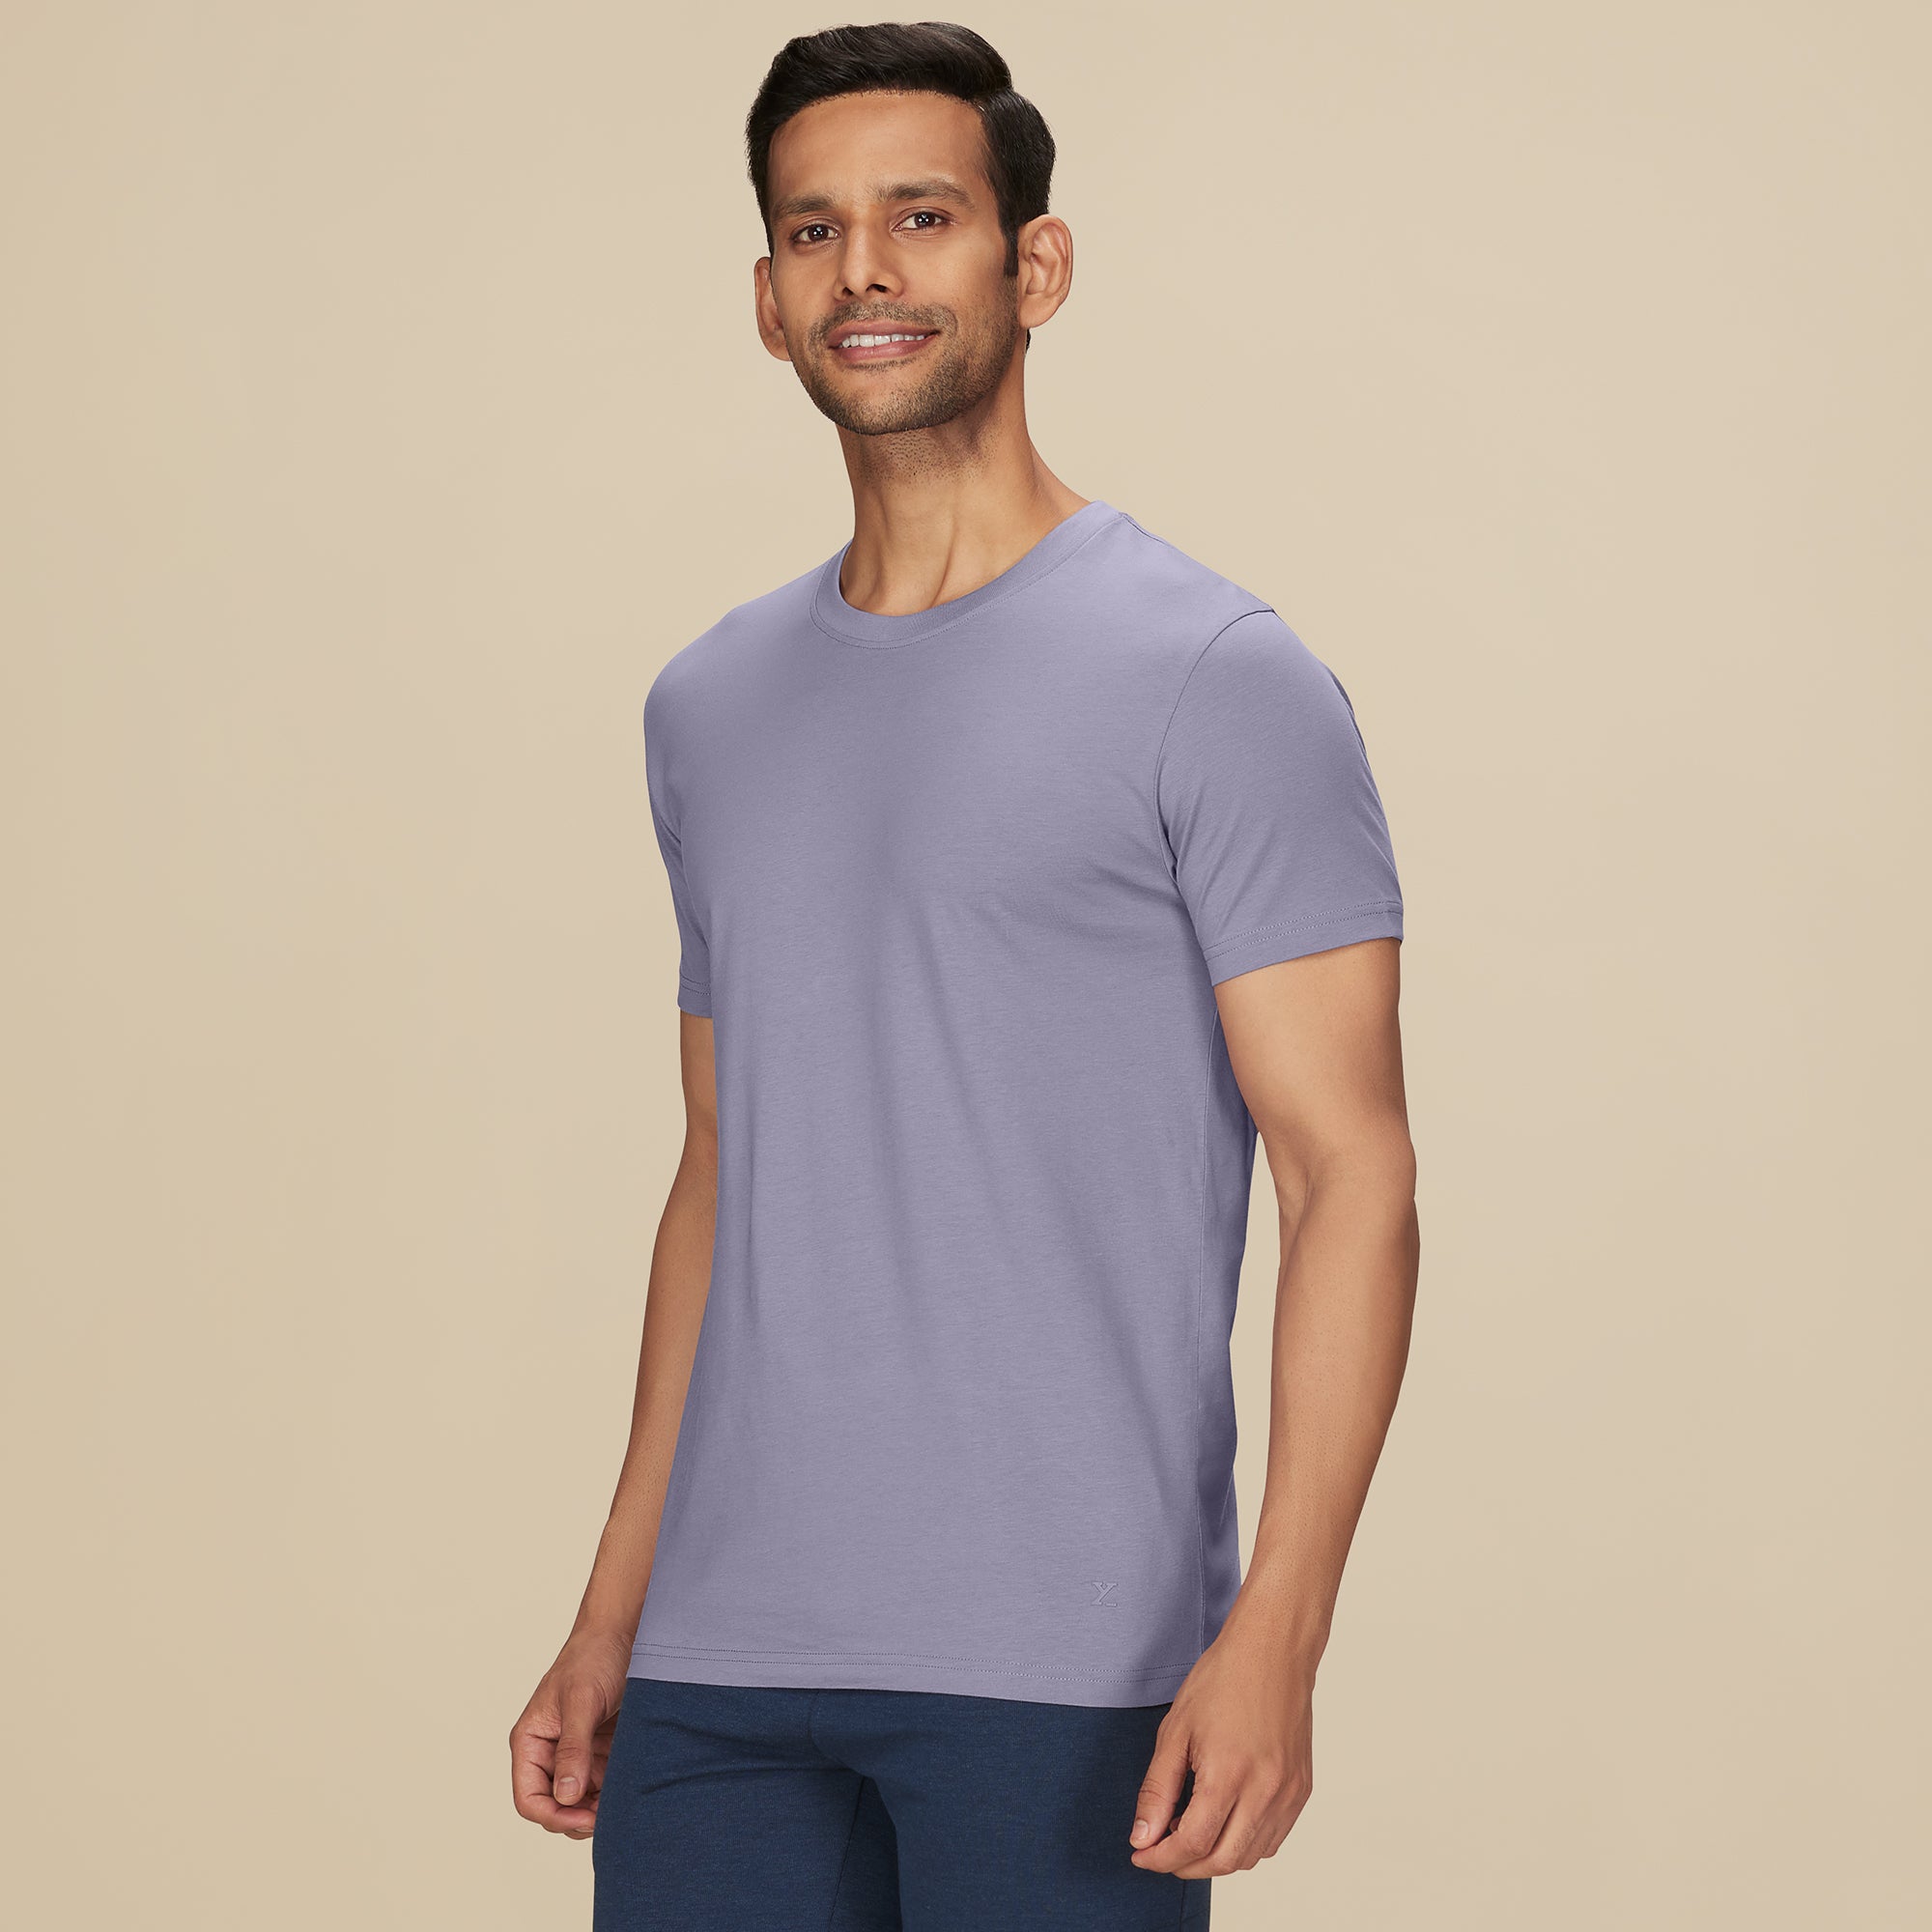 Pace Combed Cotton T-shirts For Men Misty Lilac - XYXX Crew